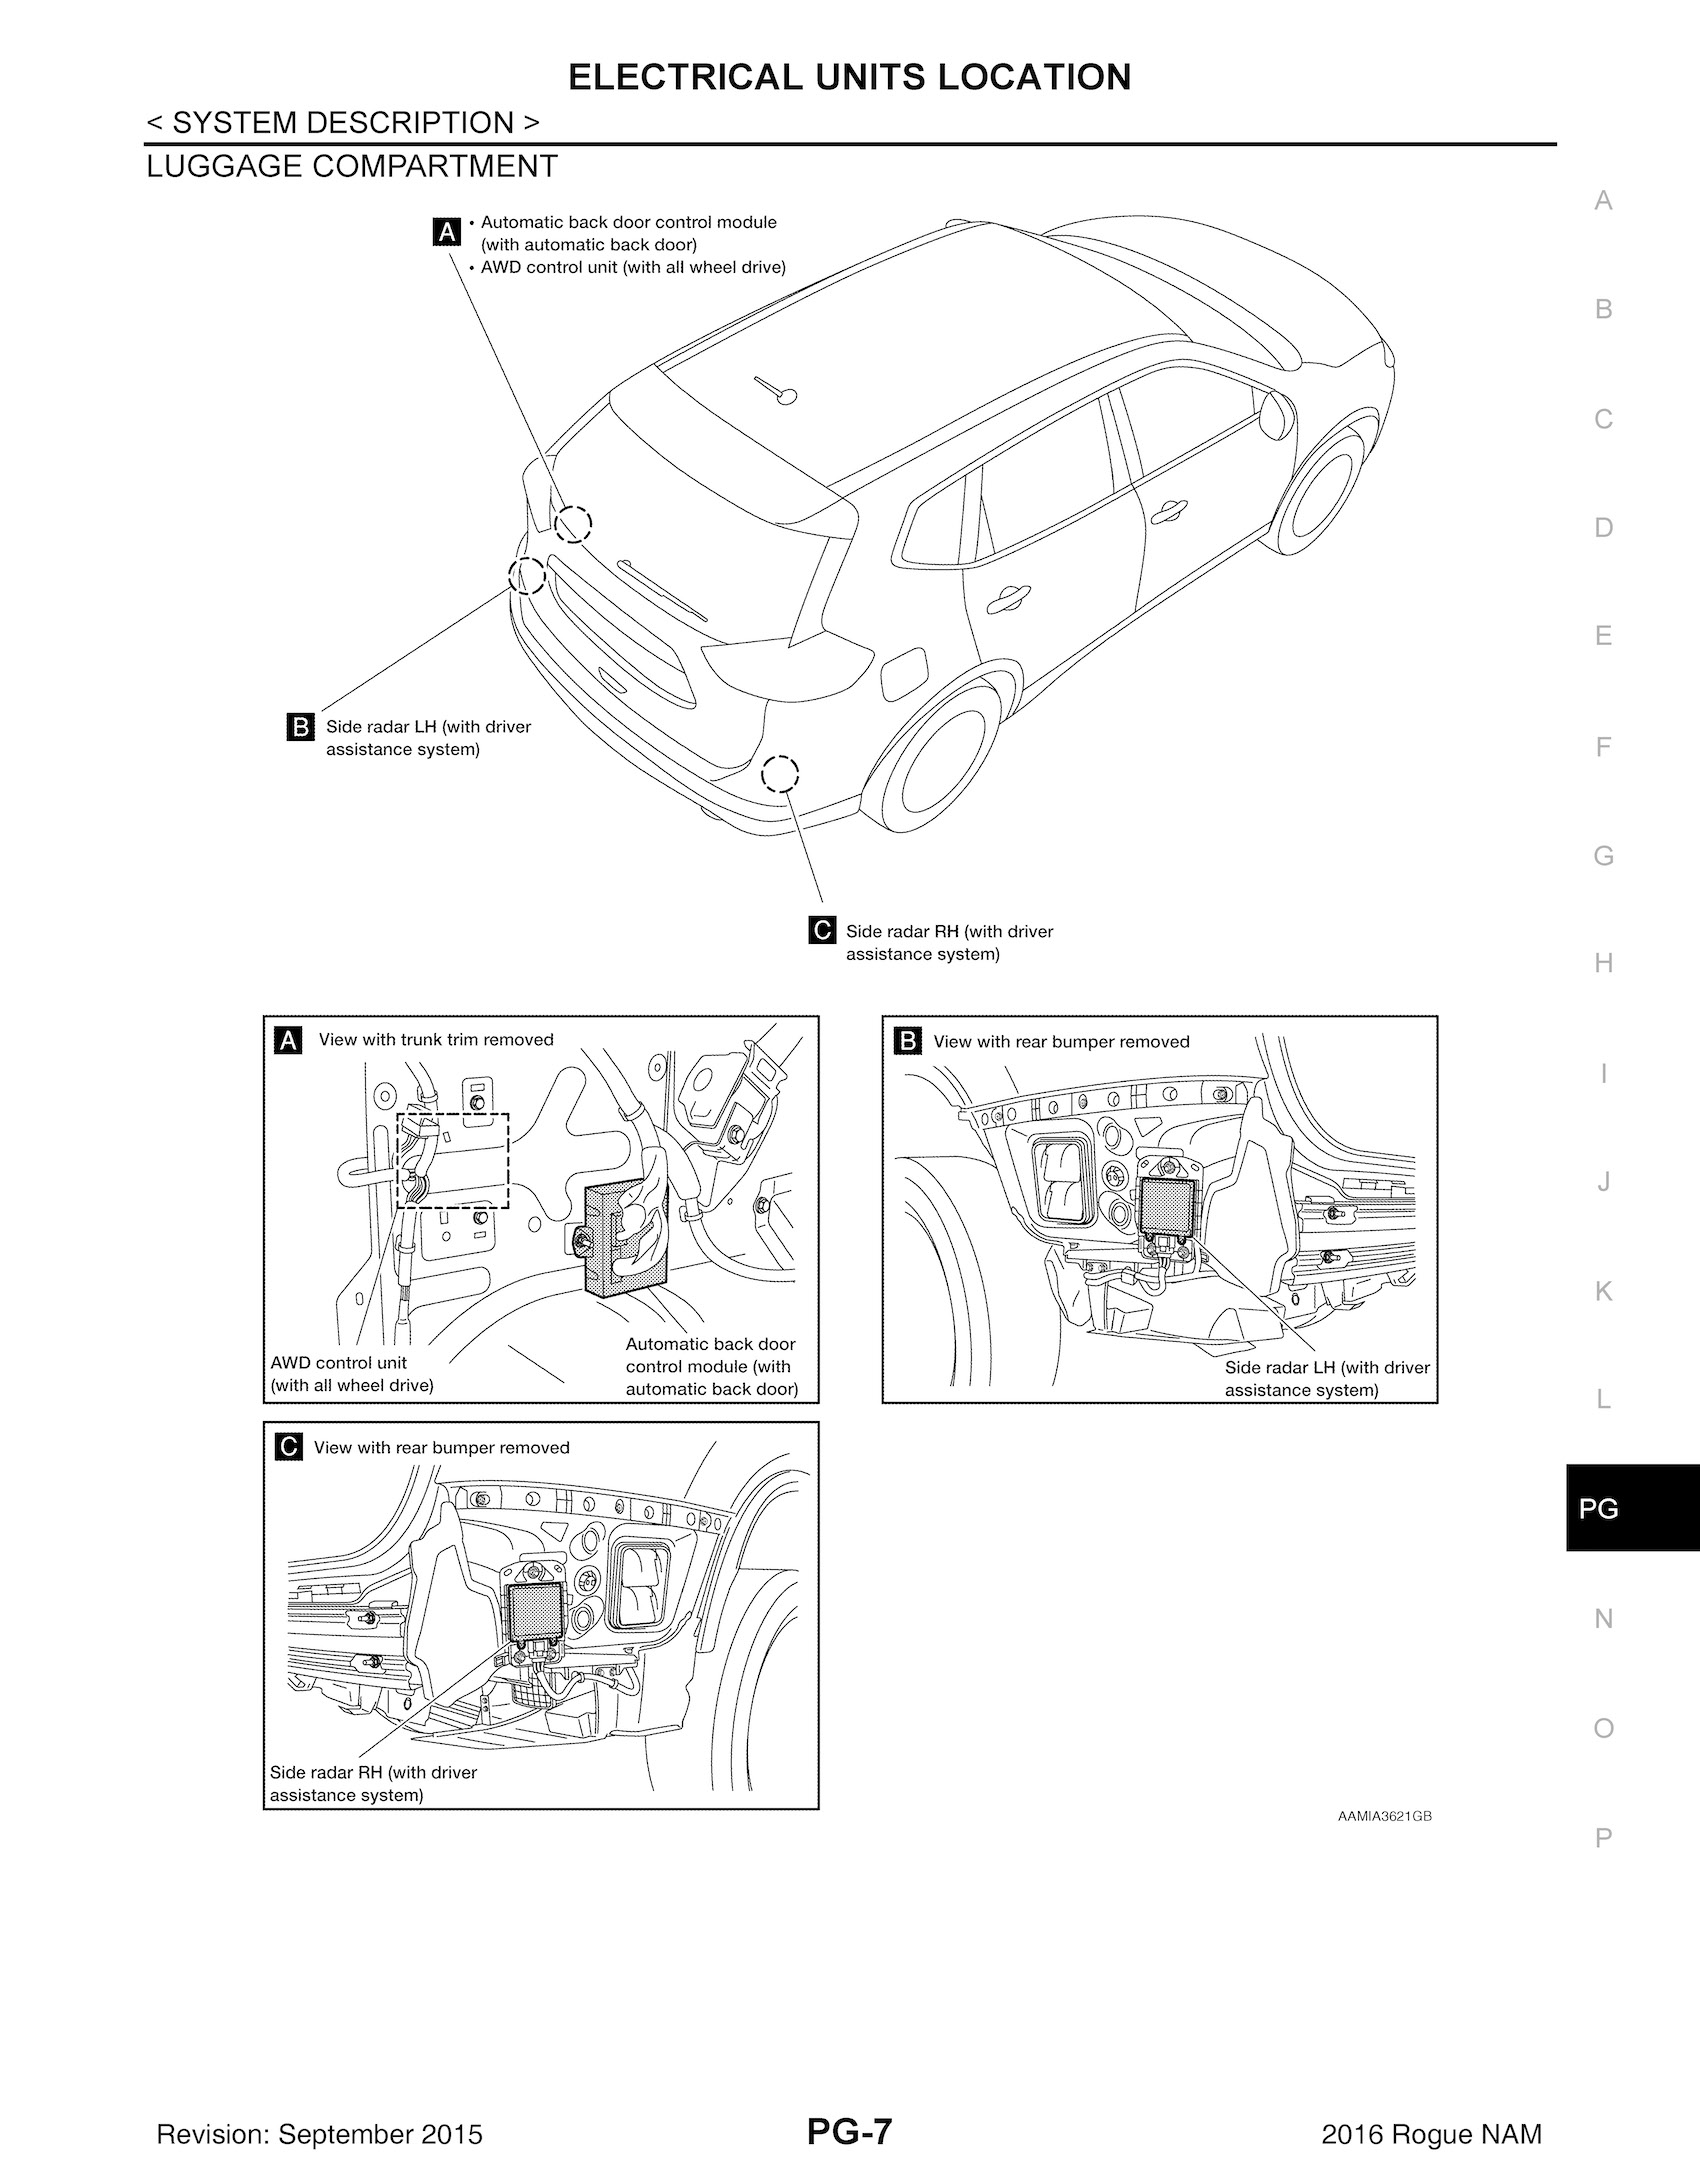 2016 Nissan Rogue T32 Repair Manual, Electrical Units Location